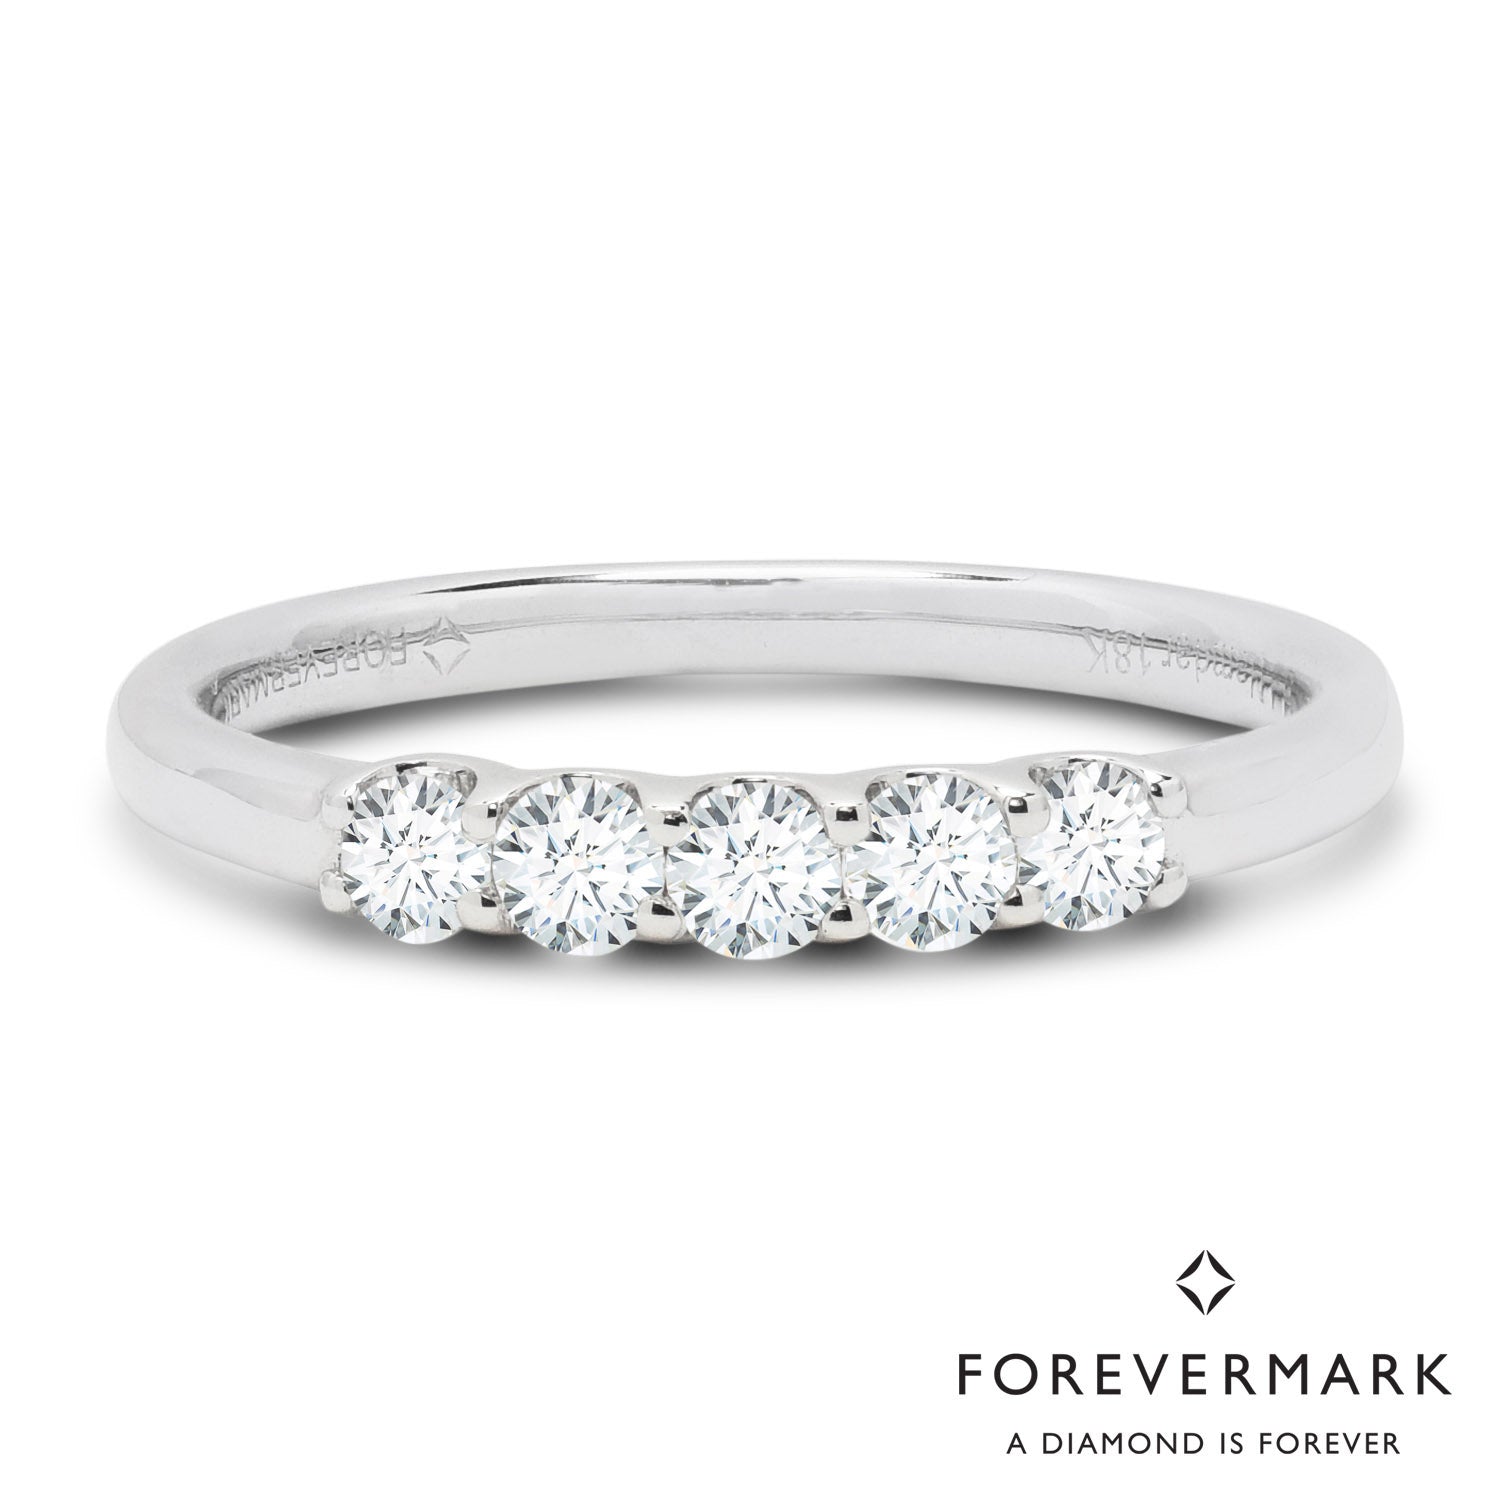 De Beers Forevermark Petite Diamond Wedding Band in 18kt White Gold (1/3ct tw)